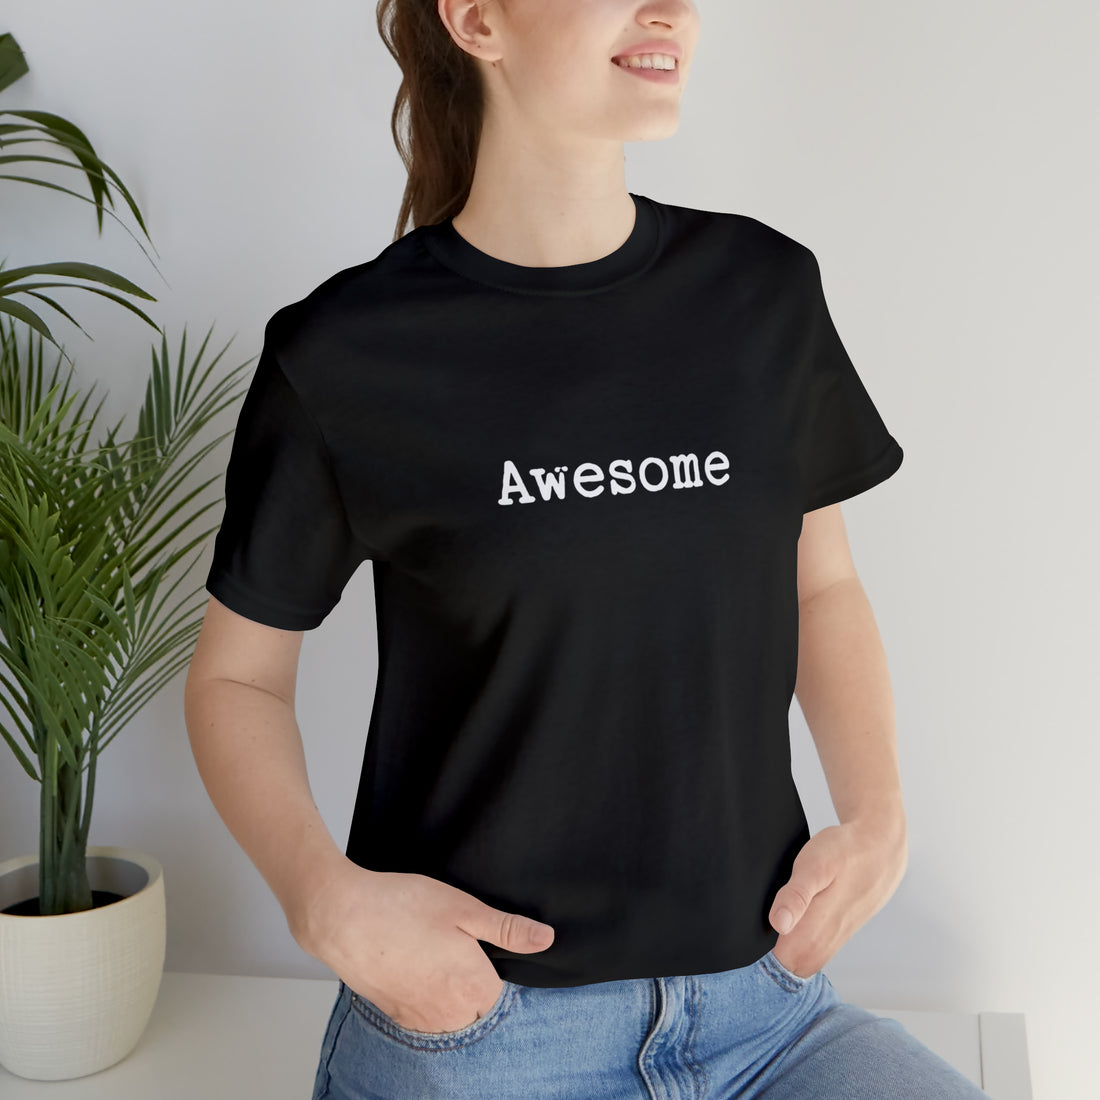 Celebrate Simplicity: Introducing the "Awesome" Shirt Design